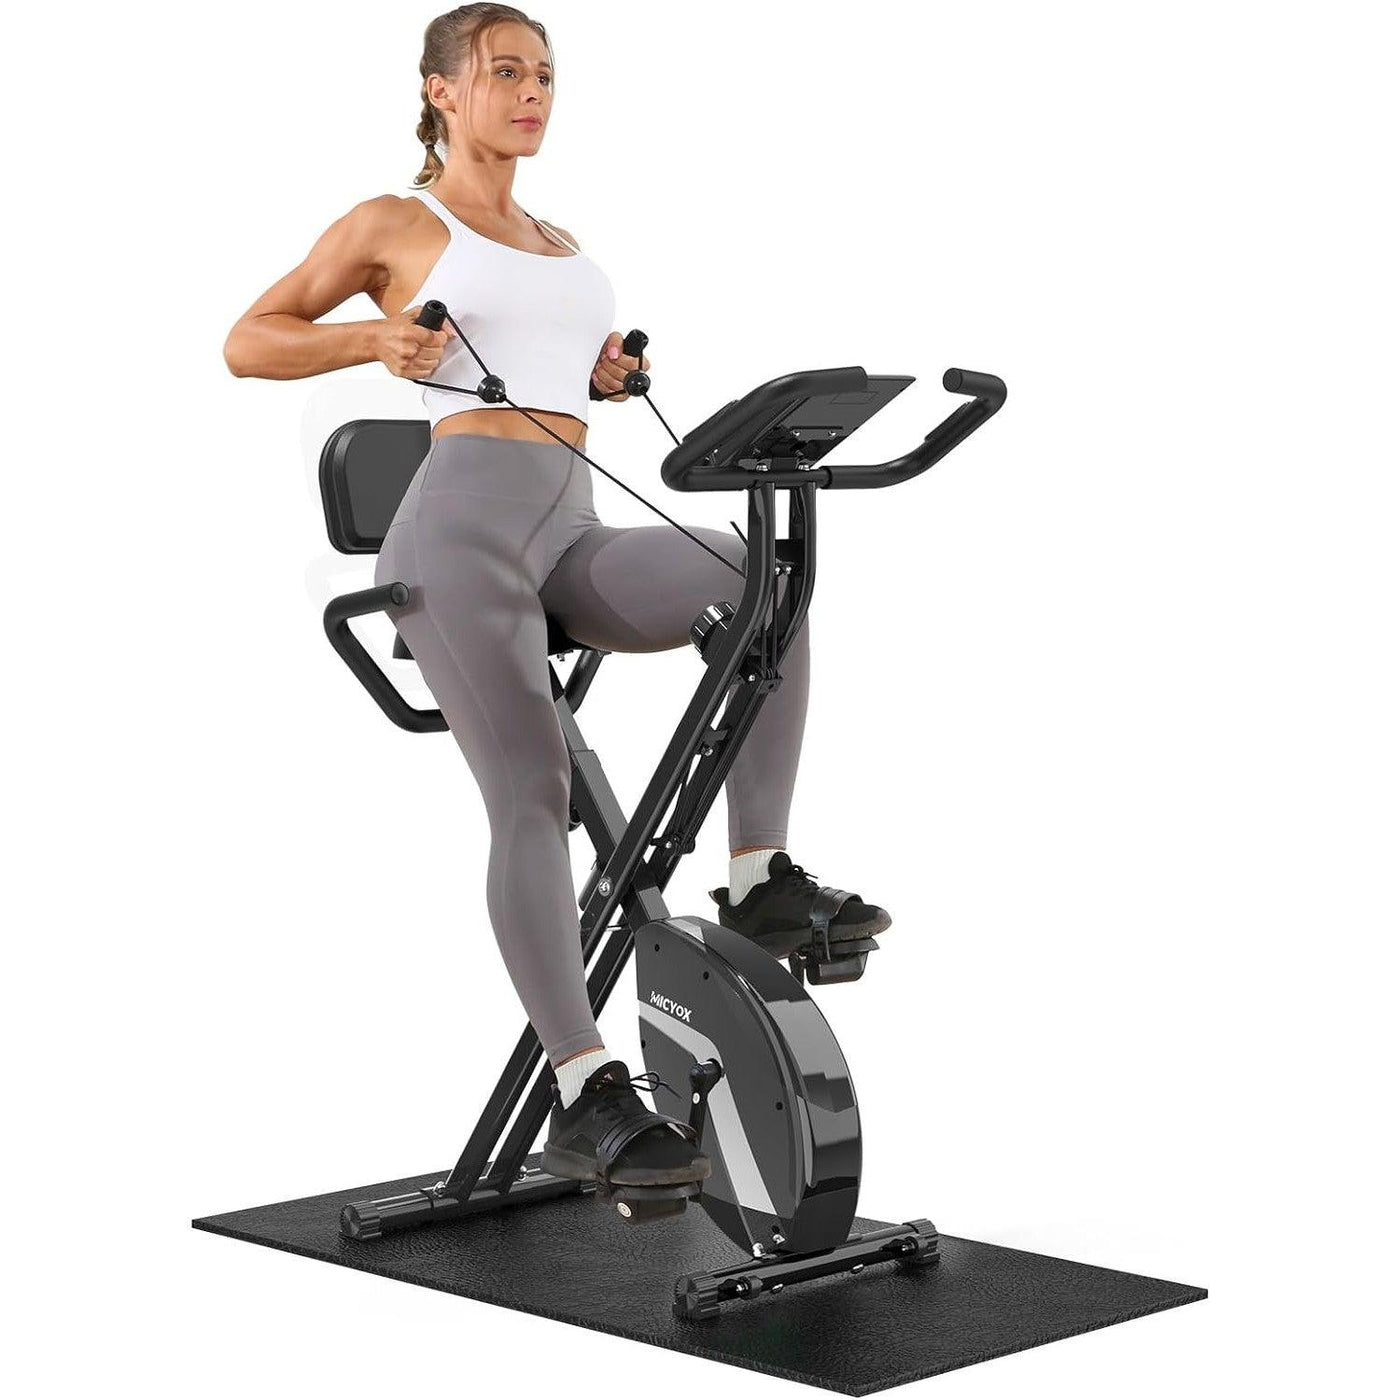 Micyox Exercise Bike, Magnetic Foldable Cycling Bike with LCD Display